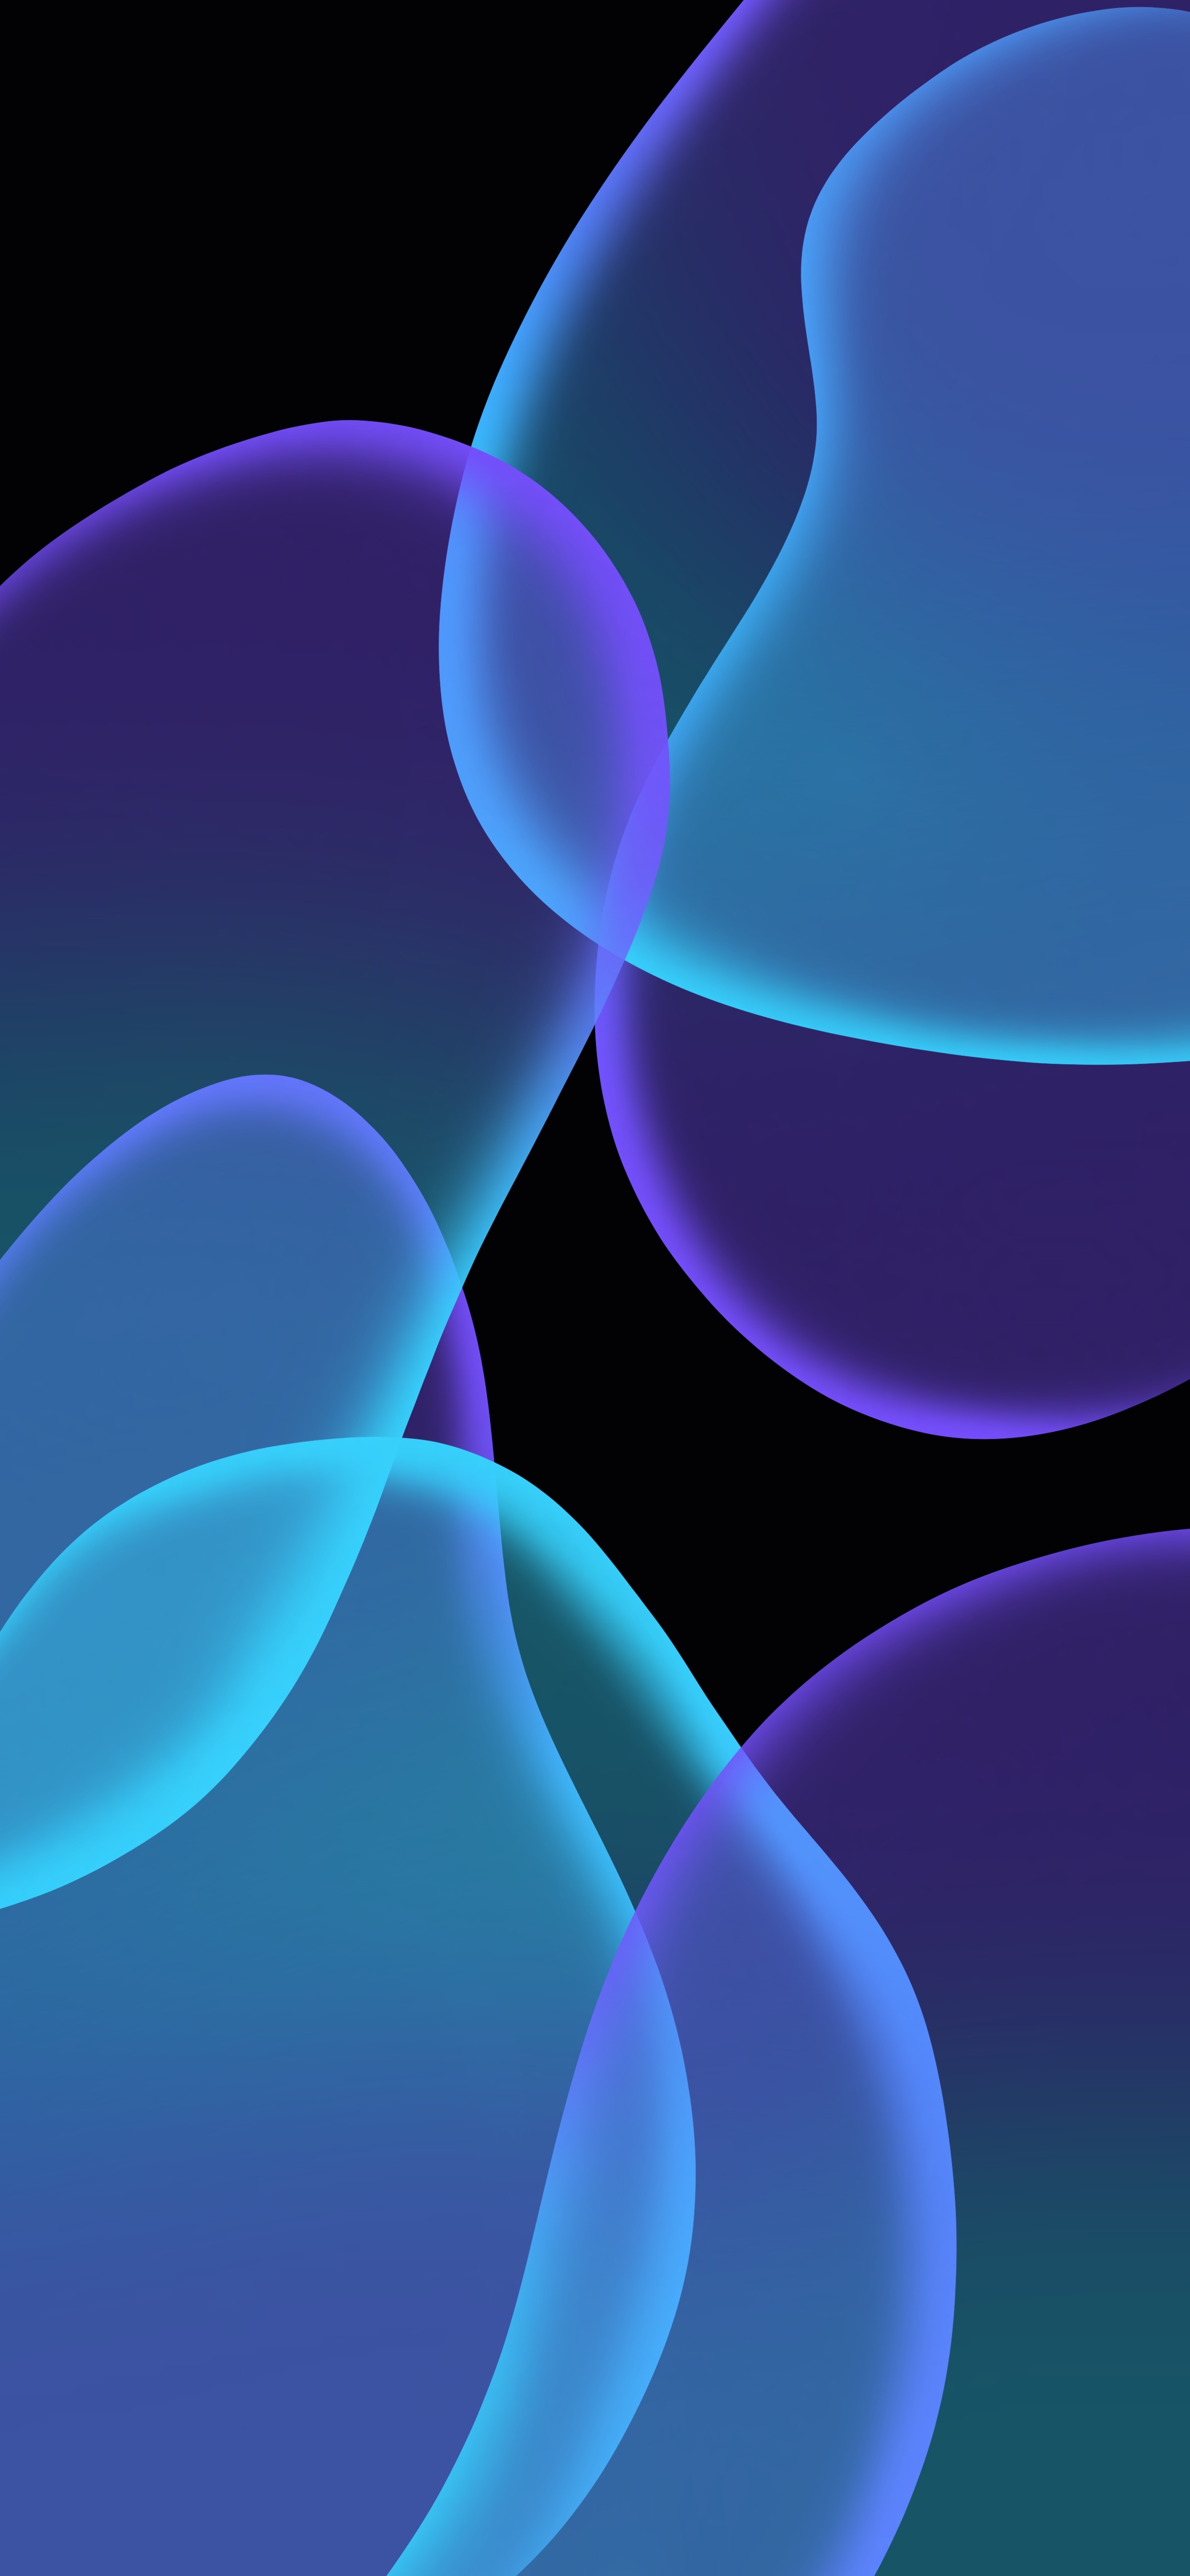 Bubbles - Wallpapers Central